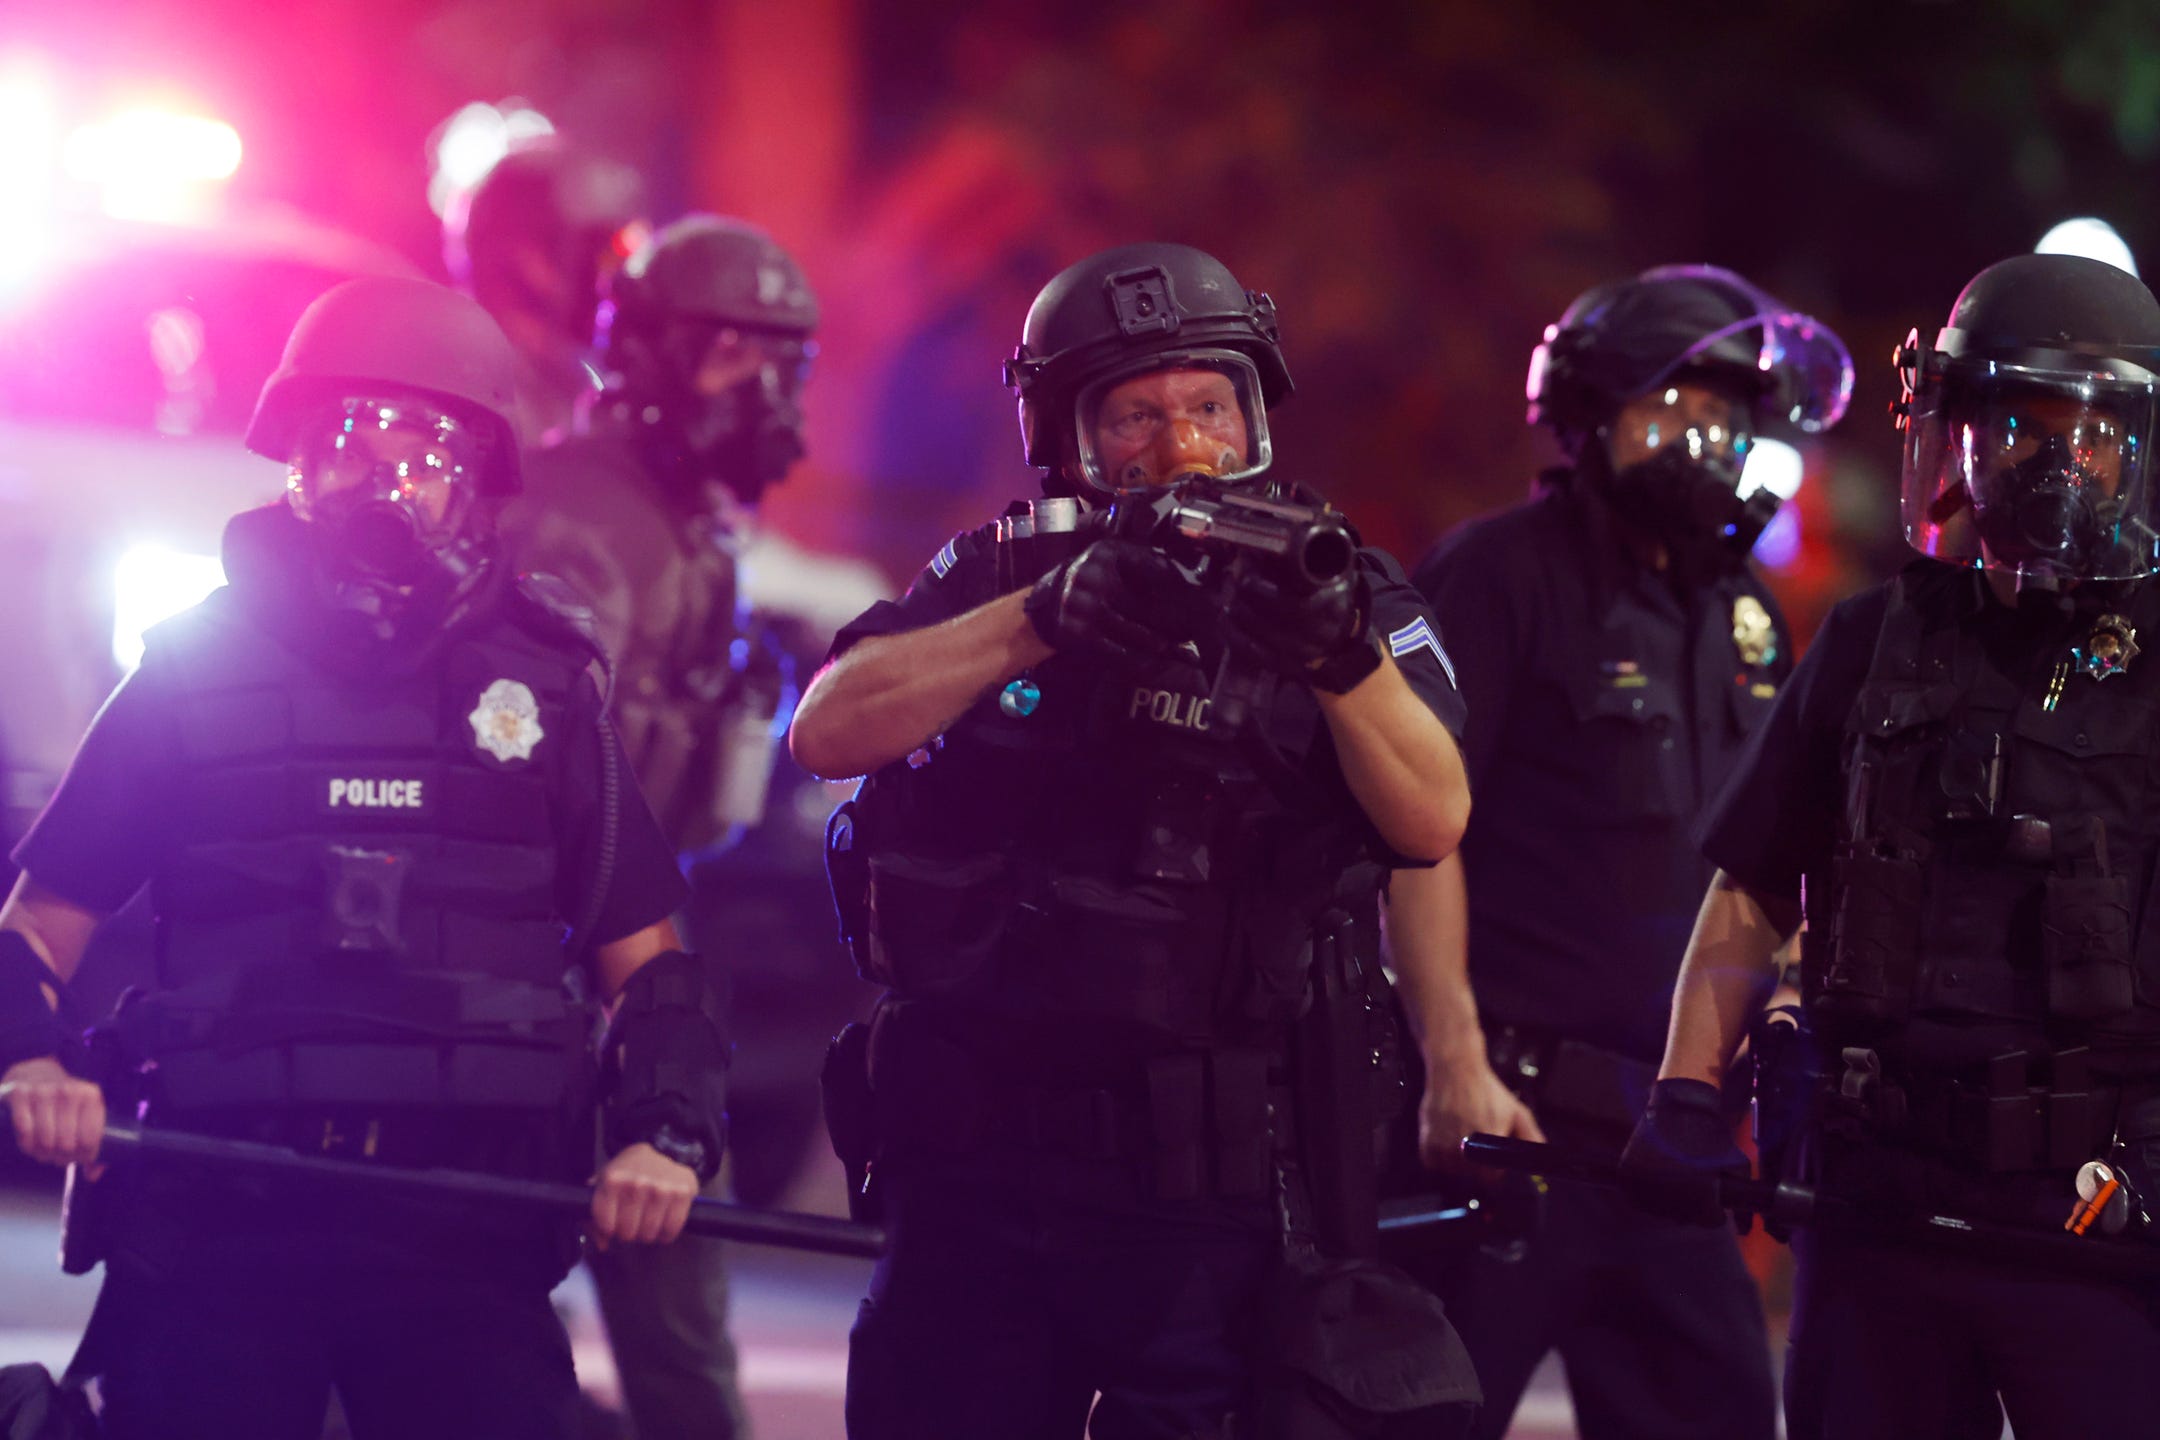 I want my left eye back': those injured by 2020's police violence